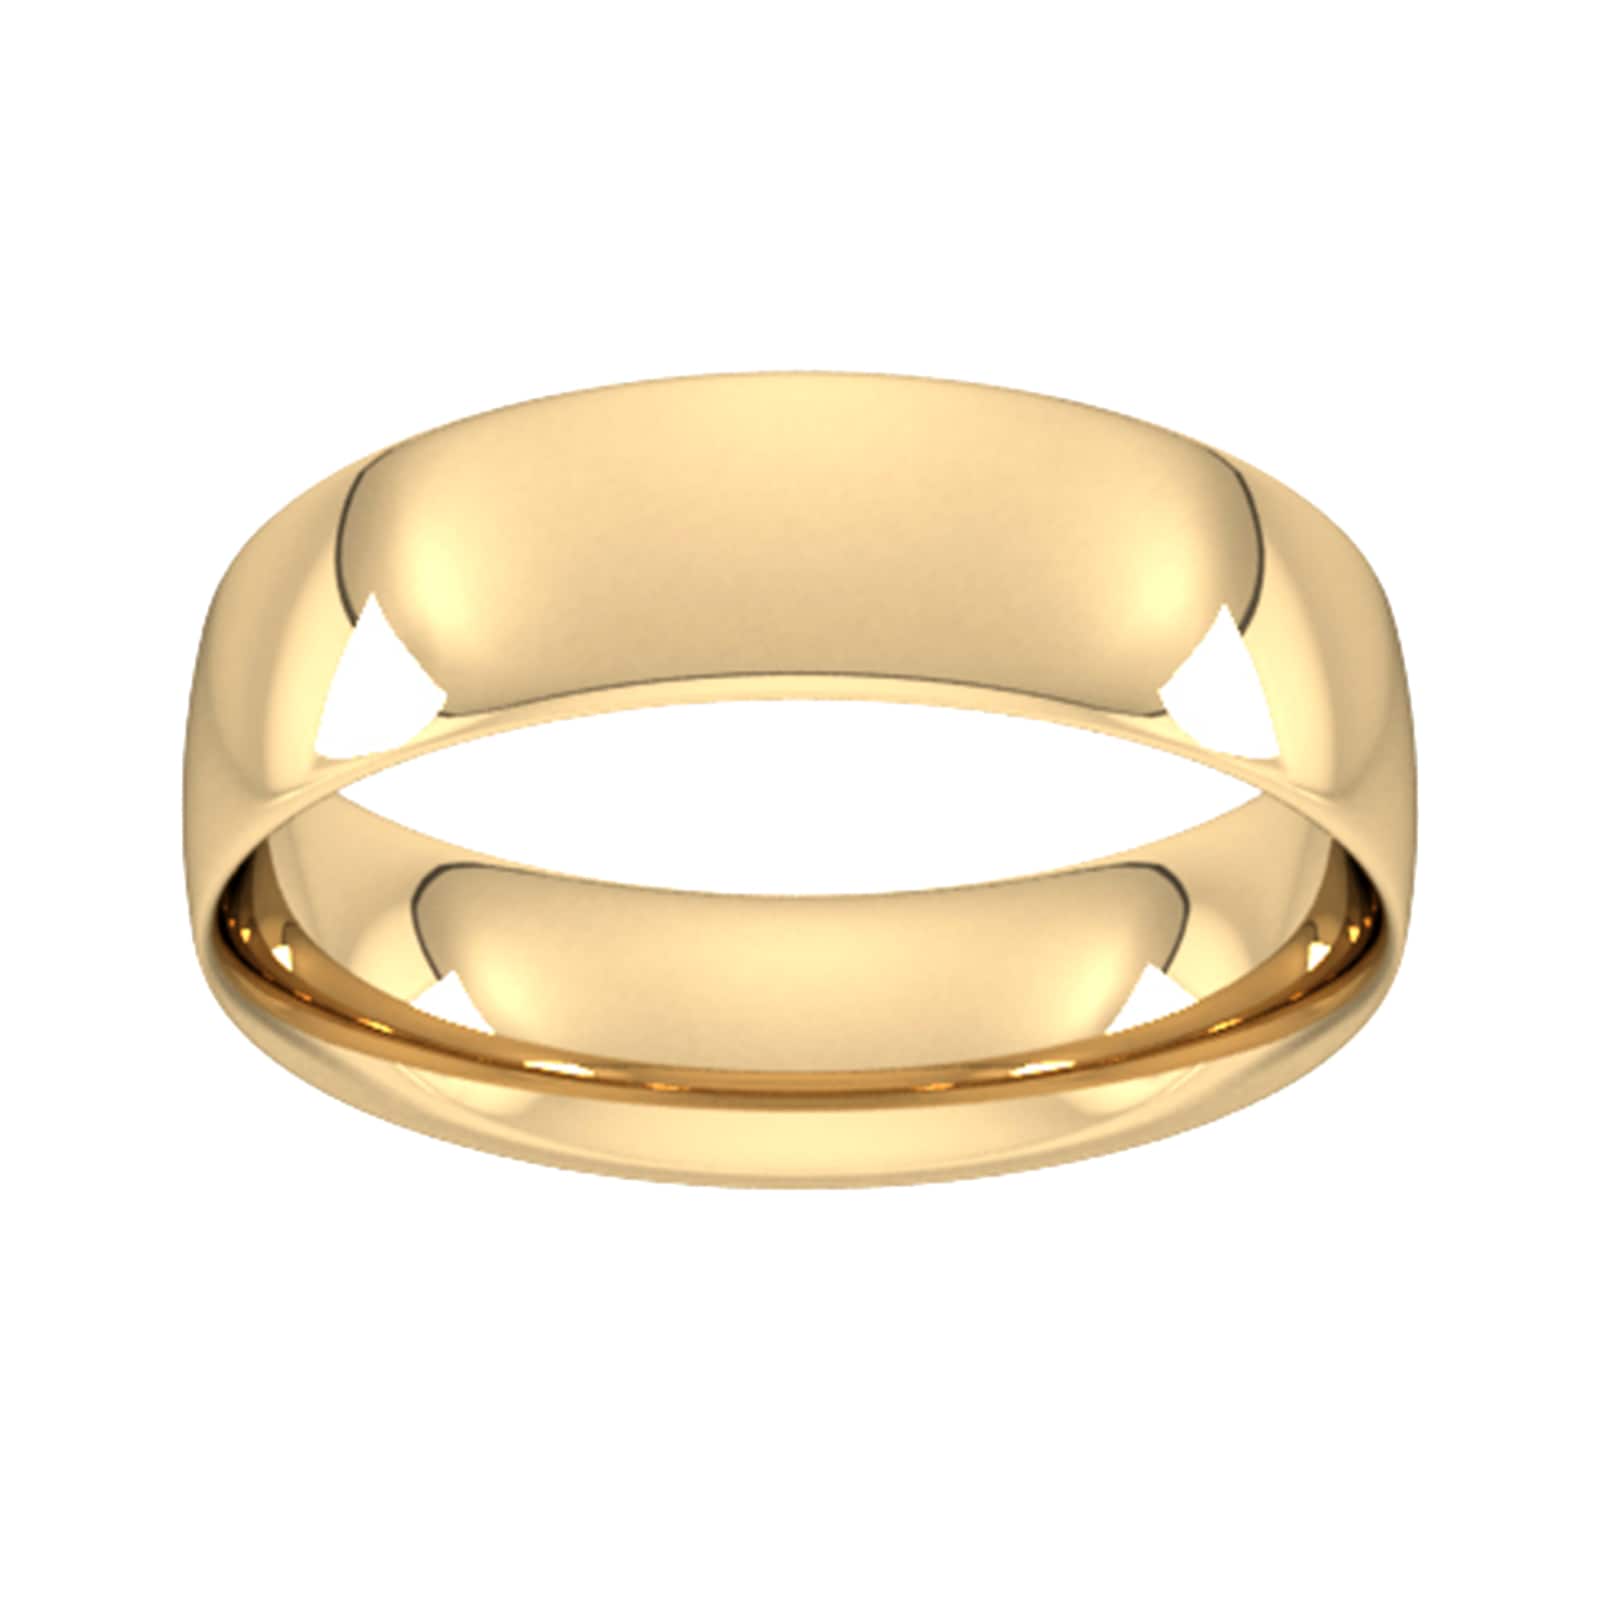 6mm Traditional Court Standard Wedding Ring In 9 Carat Yellow Gold - Ring Size W